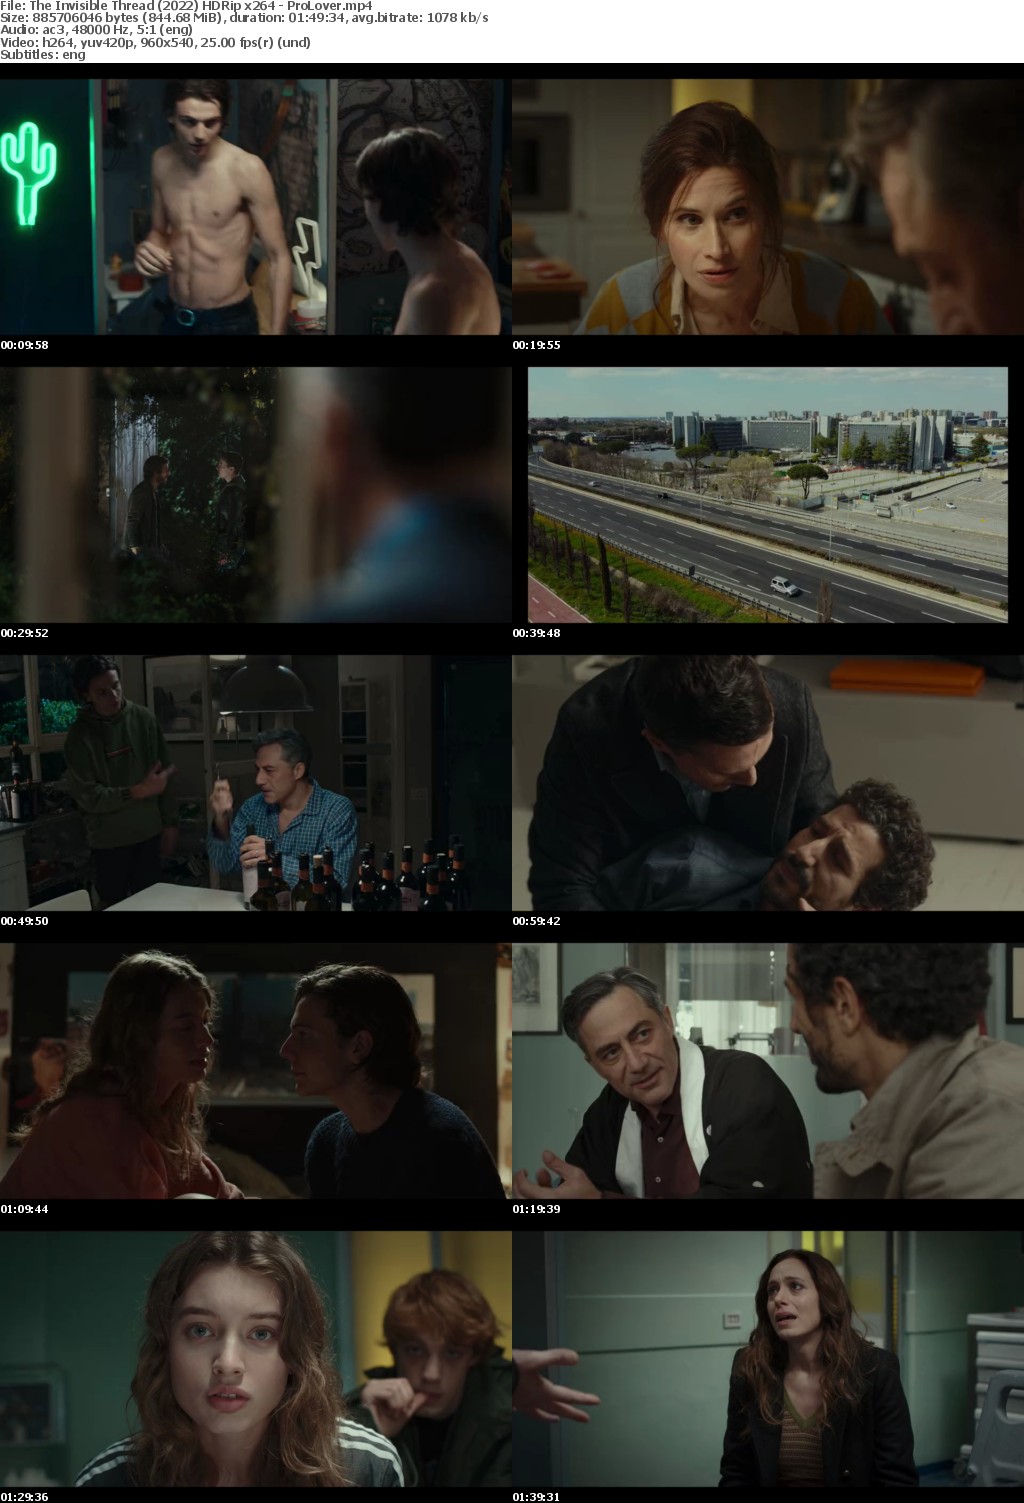 The Invisible Thread (2022) HDRip x264 - ProLover